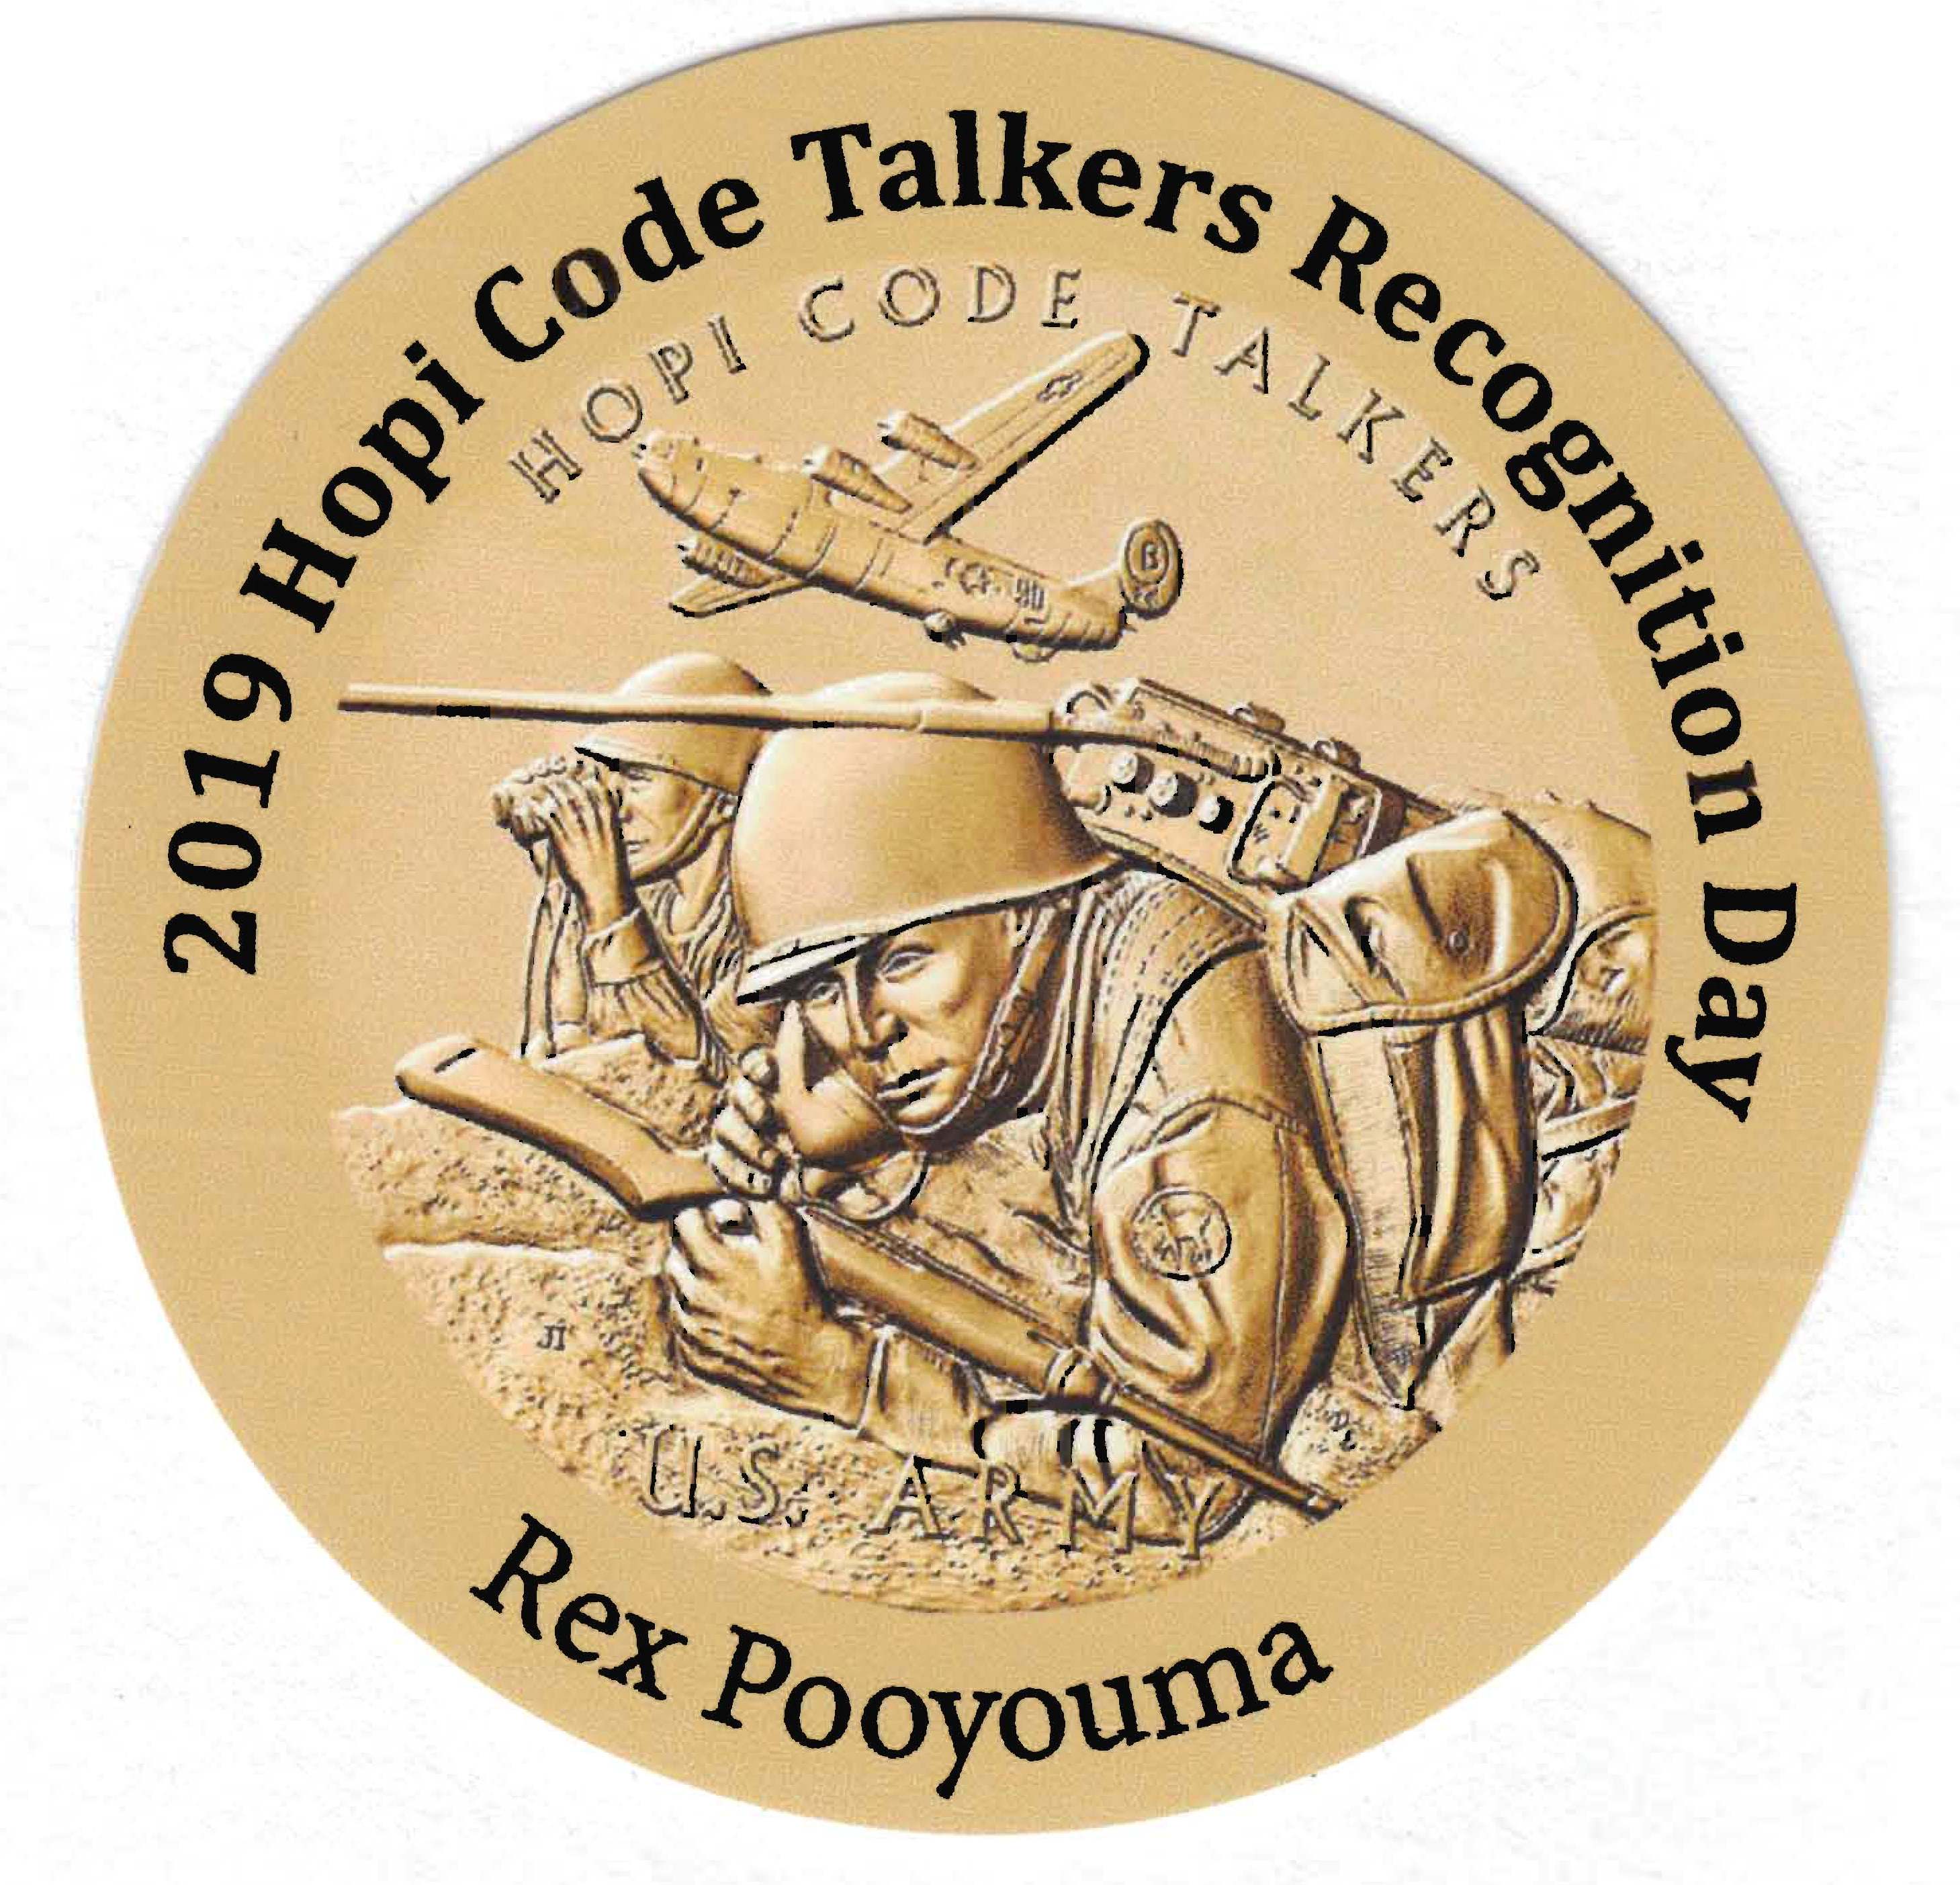 2019 Code Talker Recognition Day sticker honoring Rex Pooyouma